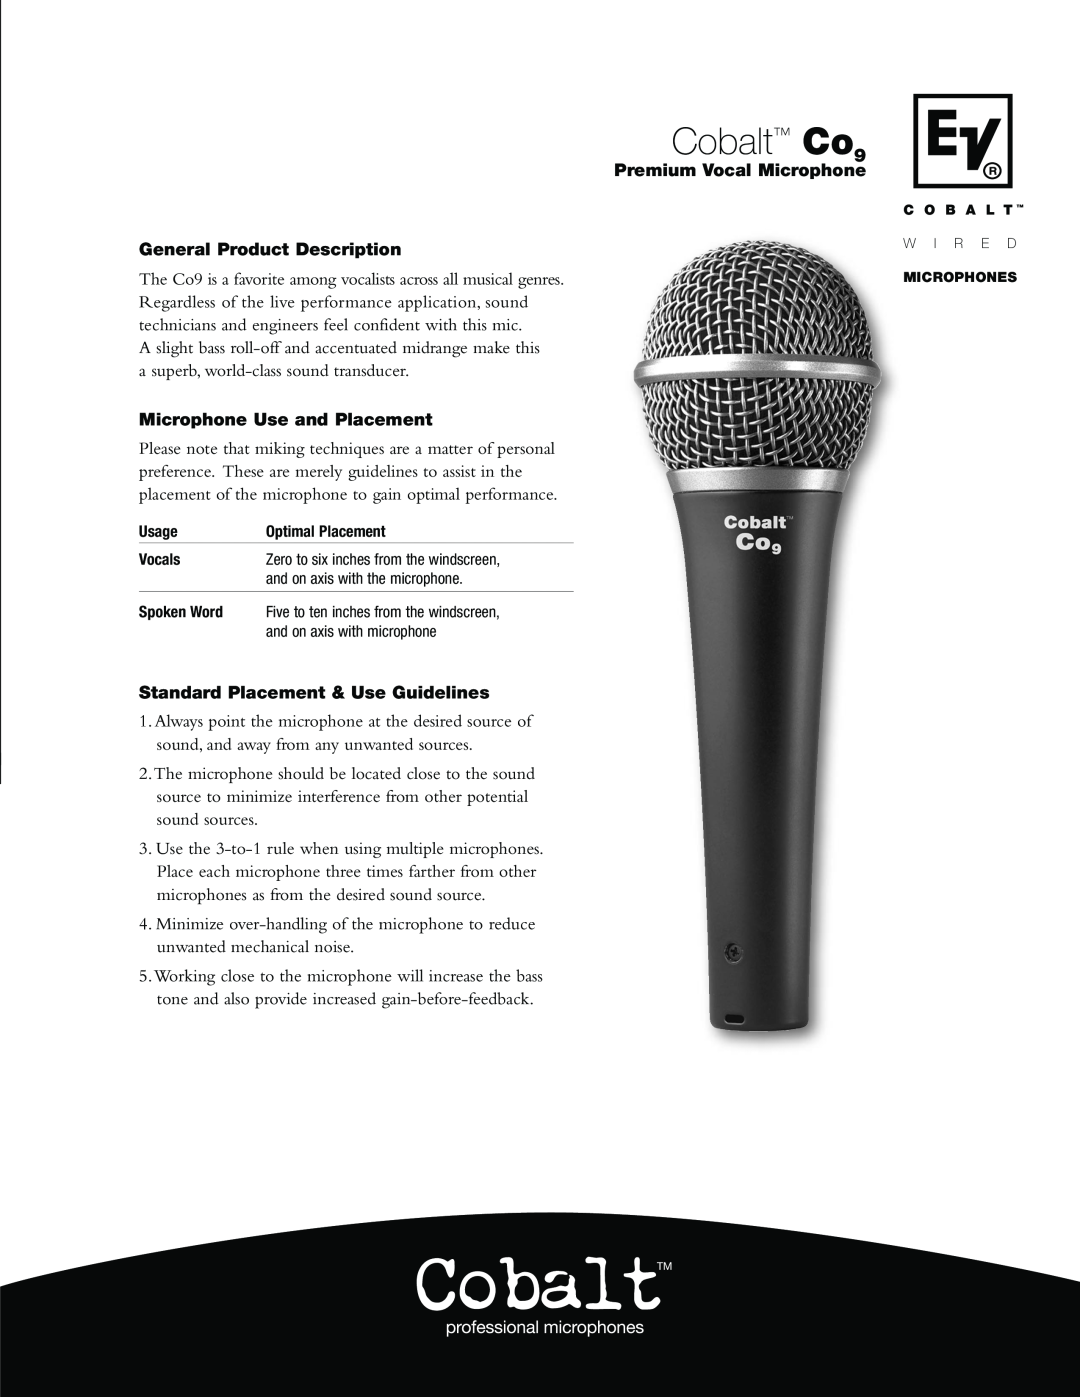 Electro-Voice Cobalt Co9 manual General Product Description, Microphone Use and Placement, Premium Vocal Microphone 